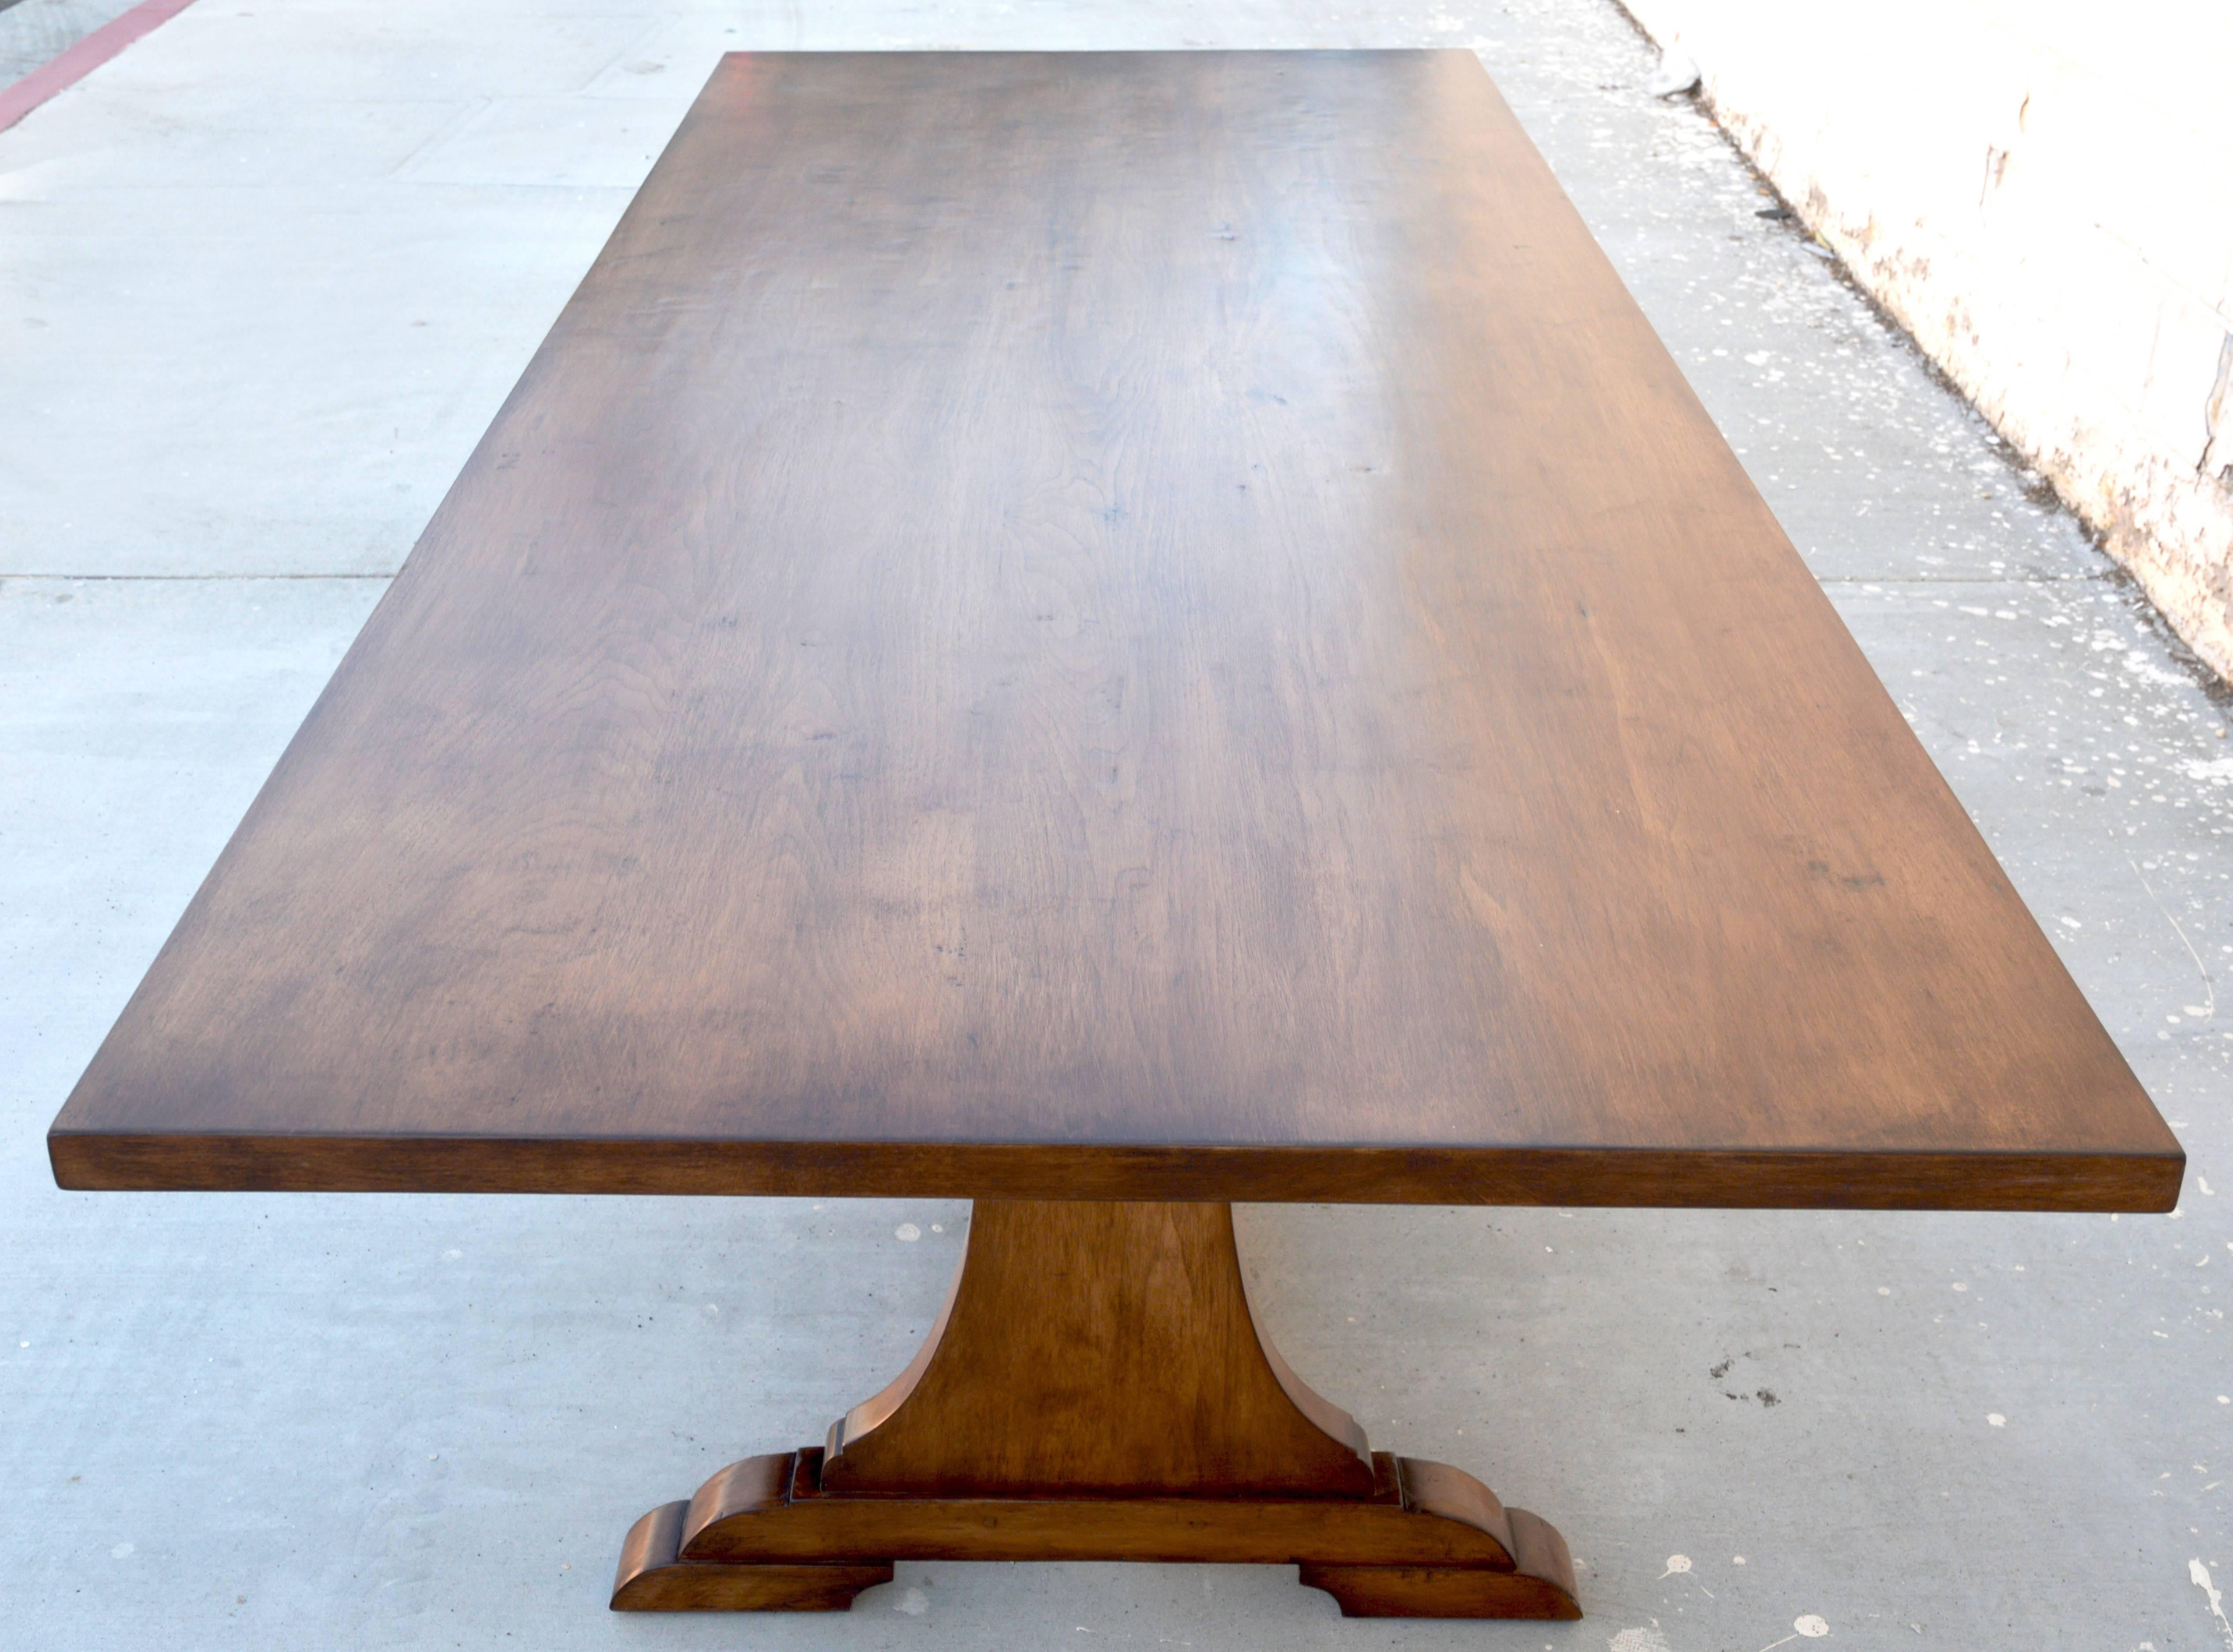 This table is built from dry-aged black walnut with the option to expand with either two or four leaves, as needed.

The sliding mechanism that locks the leaves into place is reinforced with steel bars to eliminate flexing. It stays hidden under the